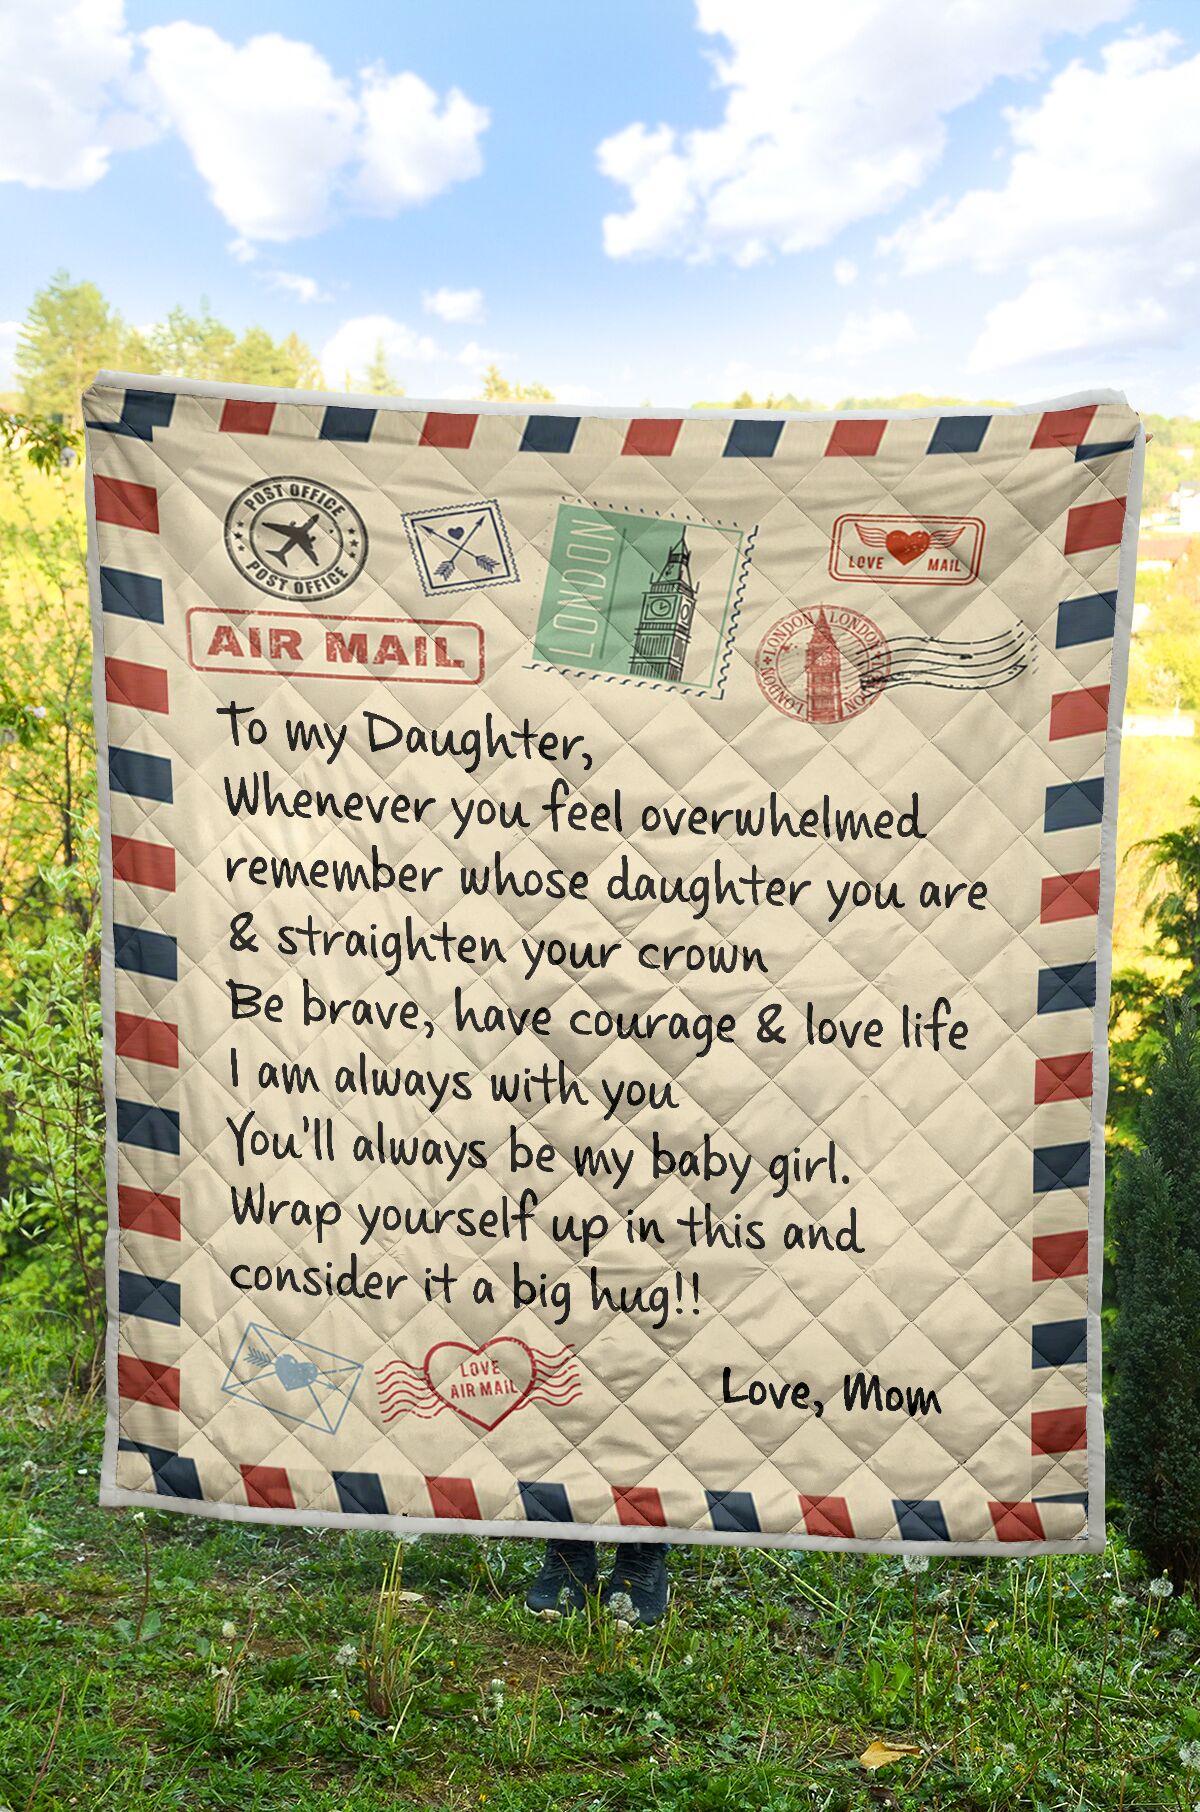 Air mail to my daughter quilt blanket